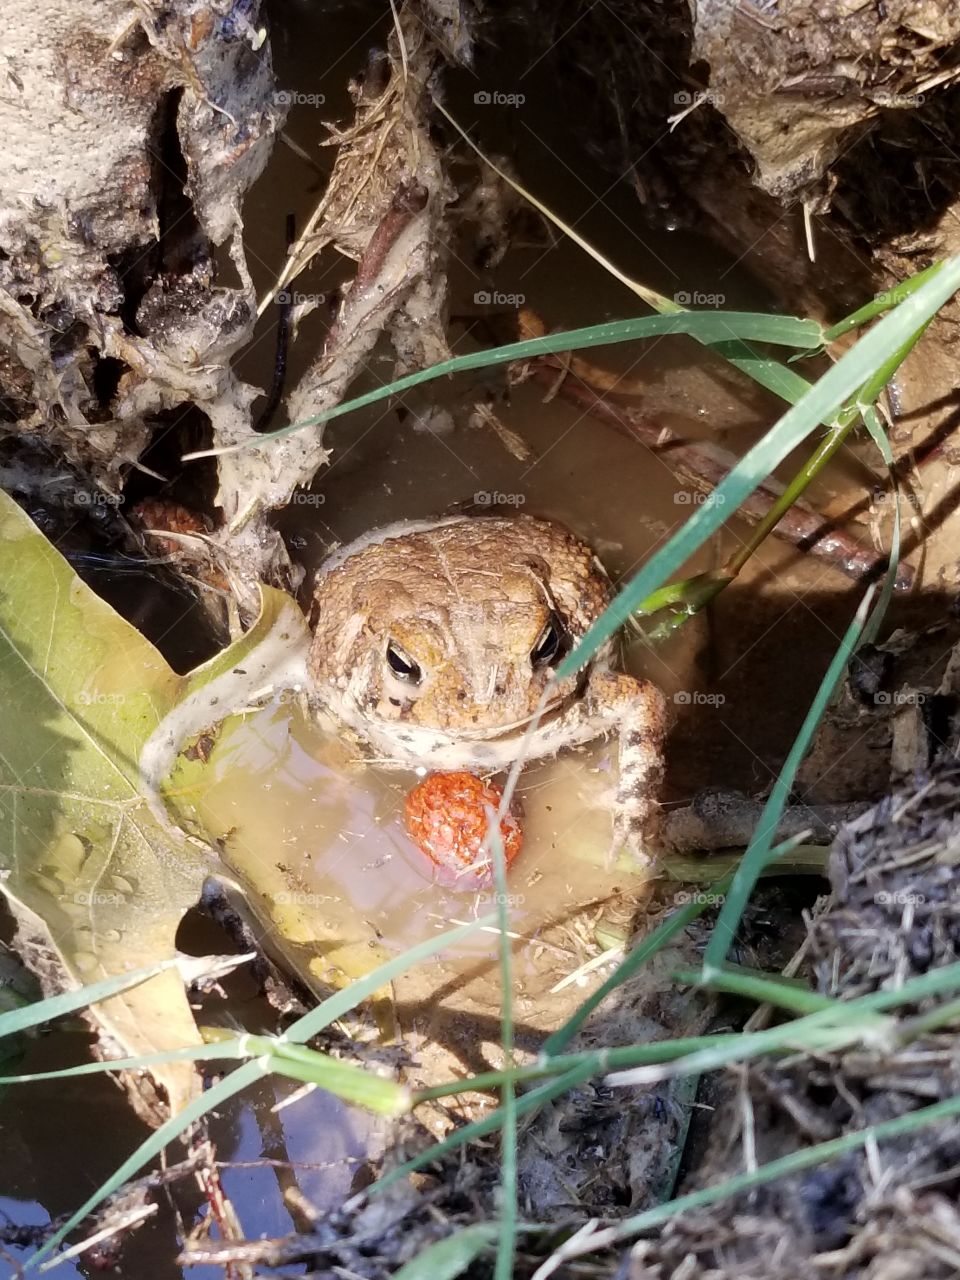 Hello, says the toad